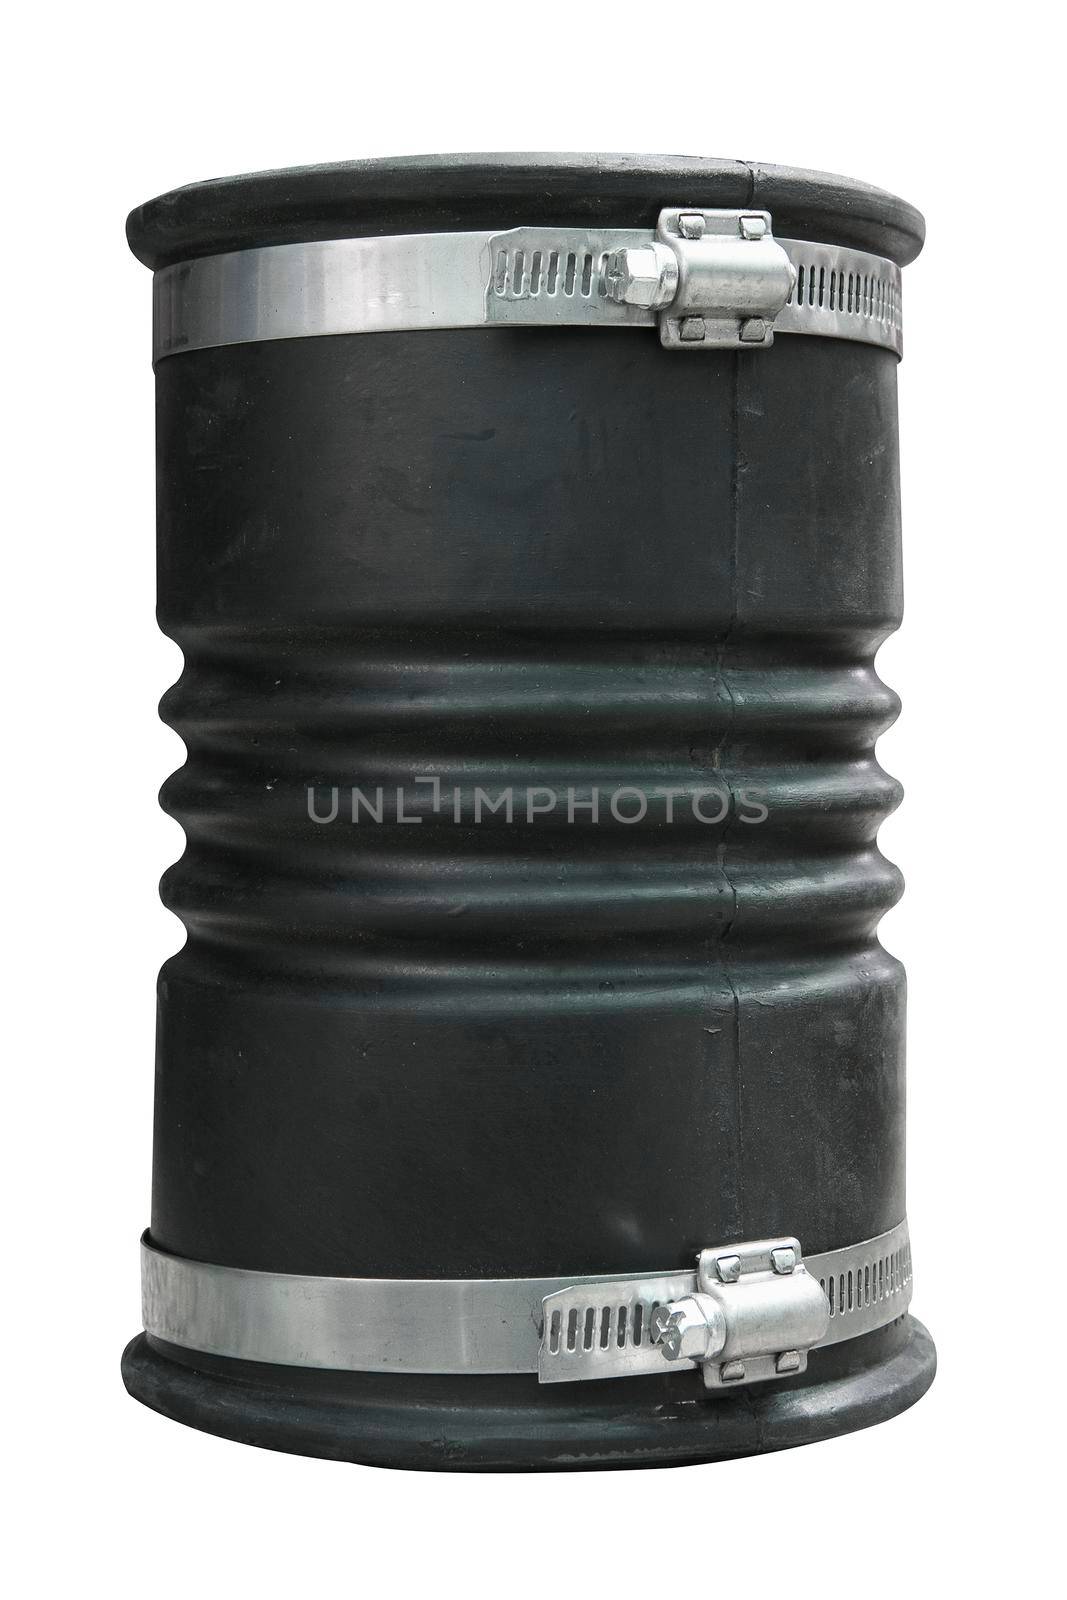 Coupling for large septic tanks, yes for buildings.